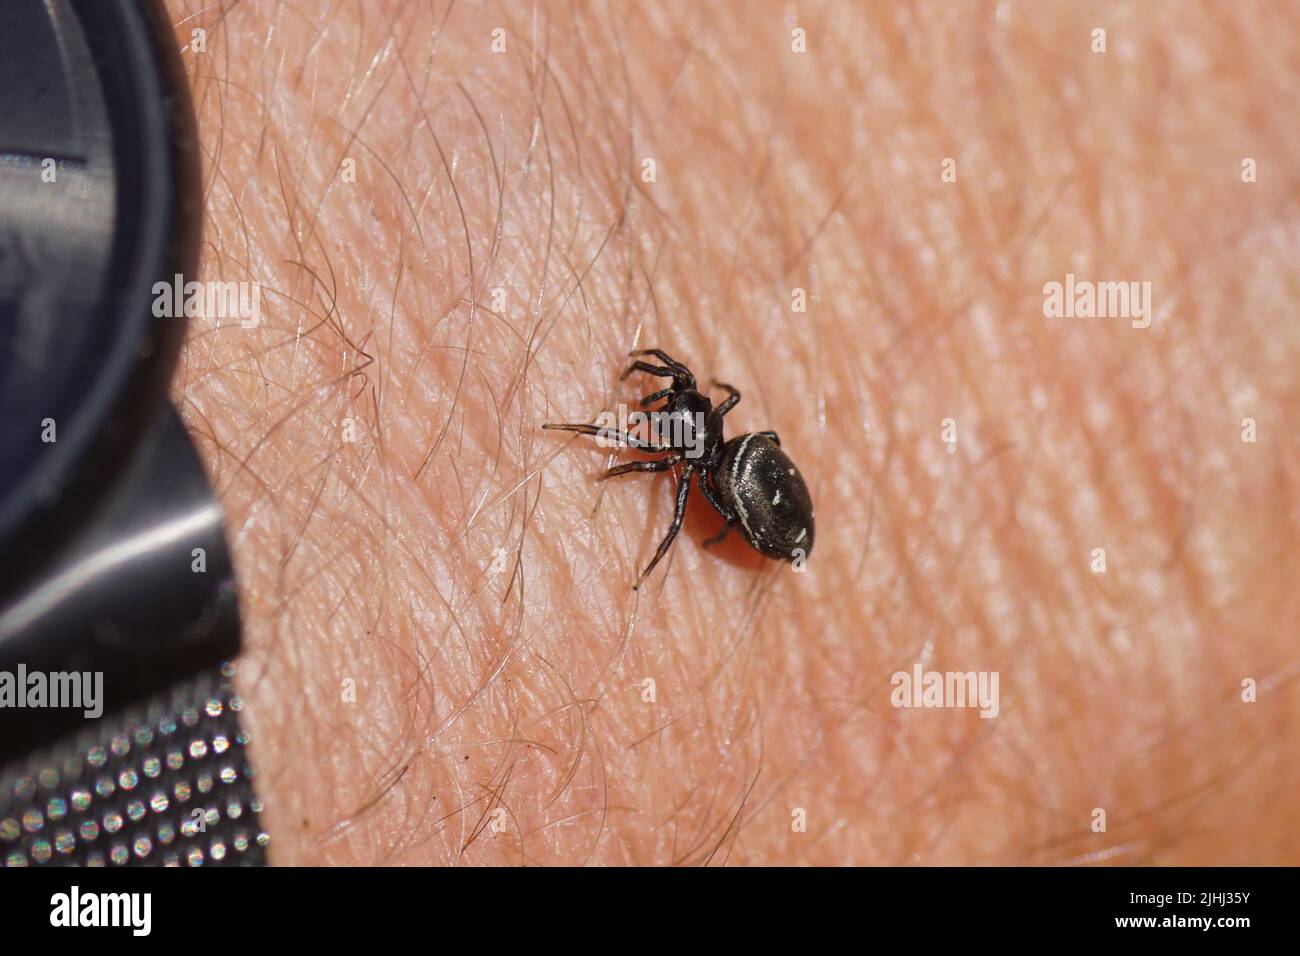 Jumping spider Heliophanus, subfamily Heliophaninae, family jumping spiders (Salticidae). On the skin of a hand. Summer, July. Stock Photo